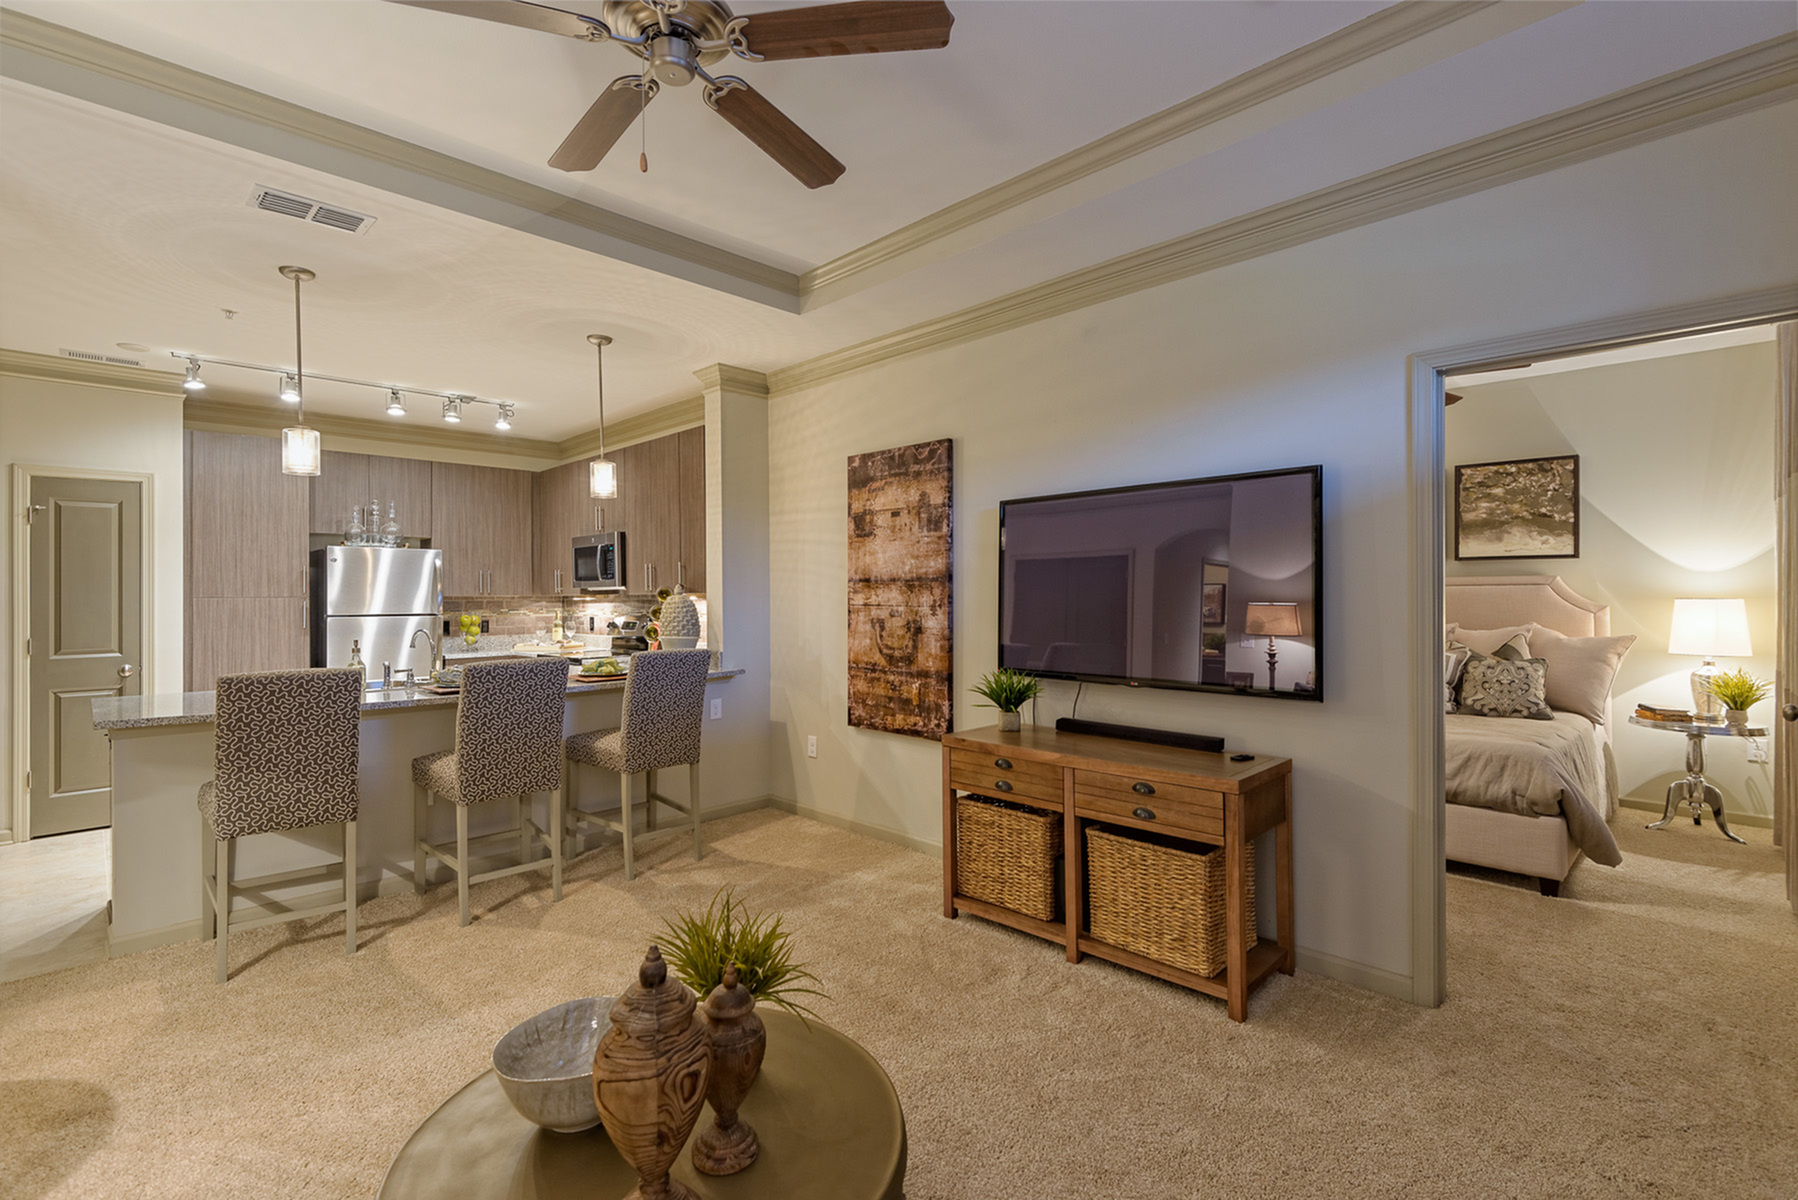 View of Living Room, Showing Ceiling Fan, View of Kitchen and Bedroom at Heights at Meridian Apartments